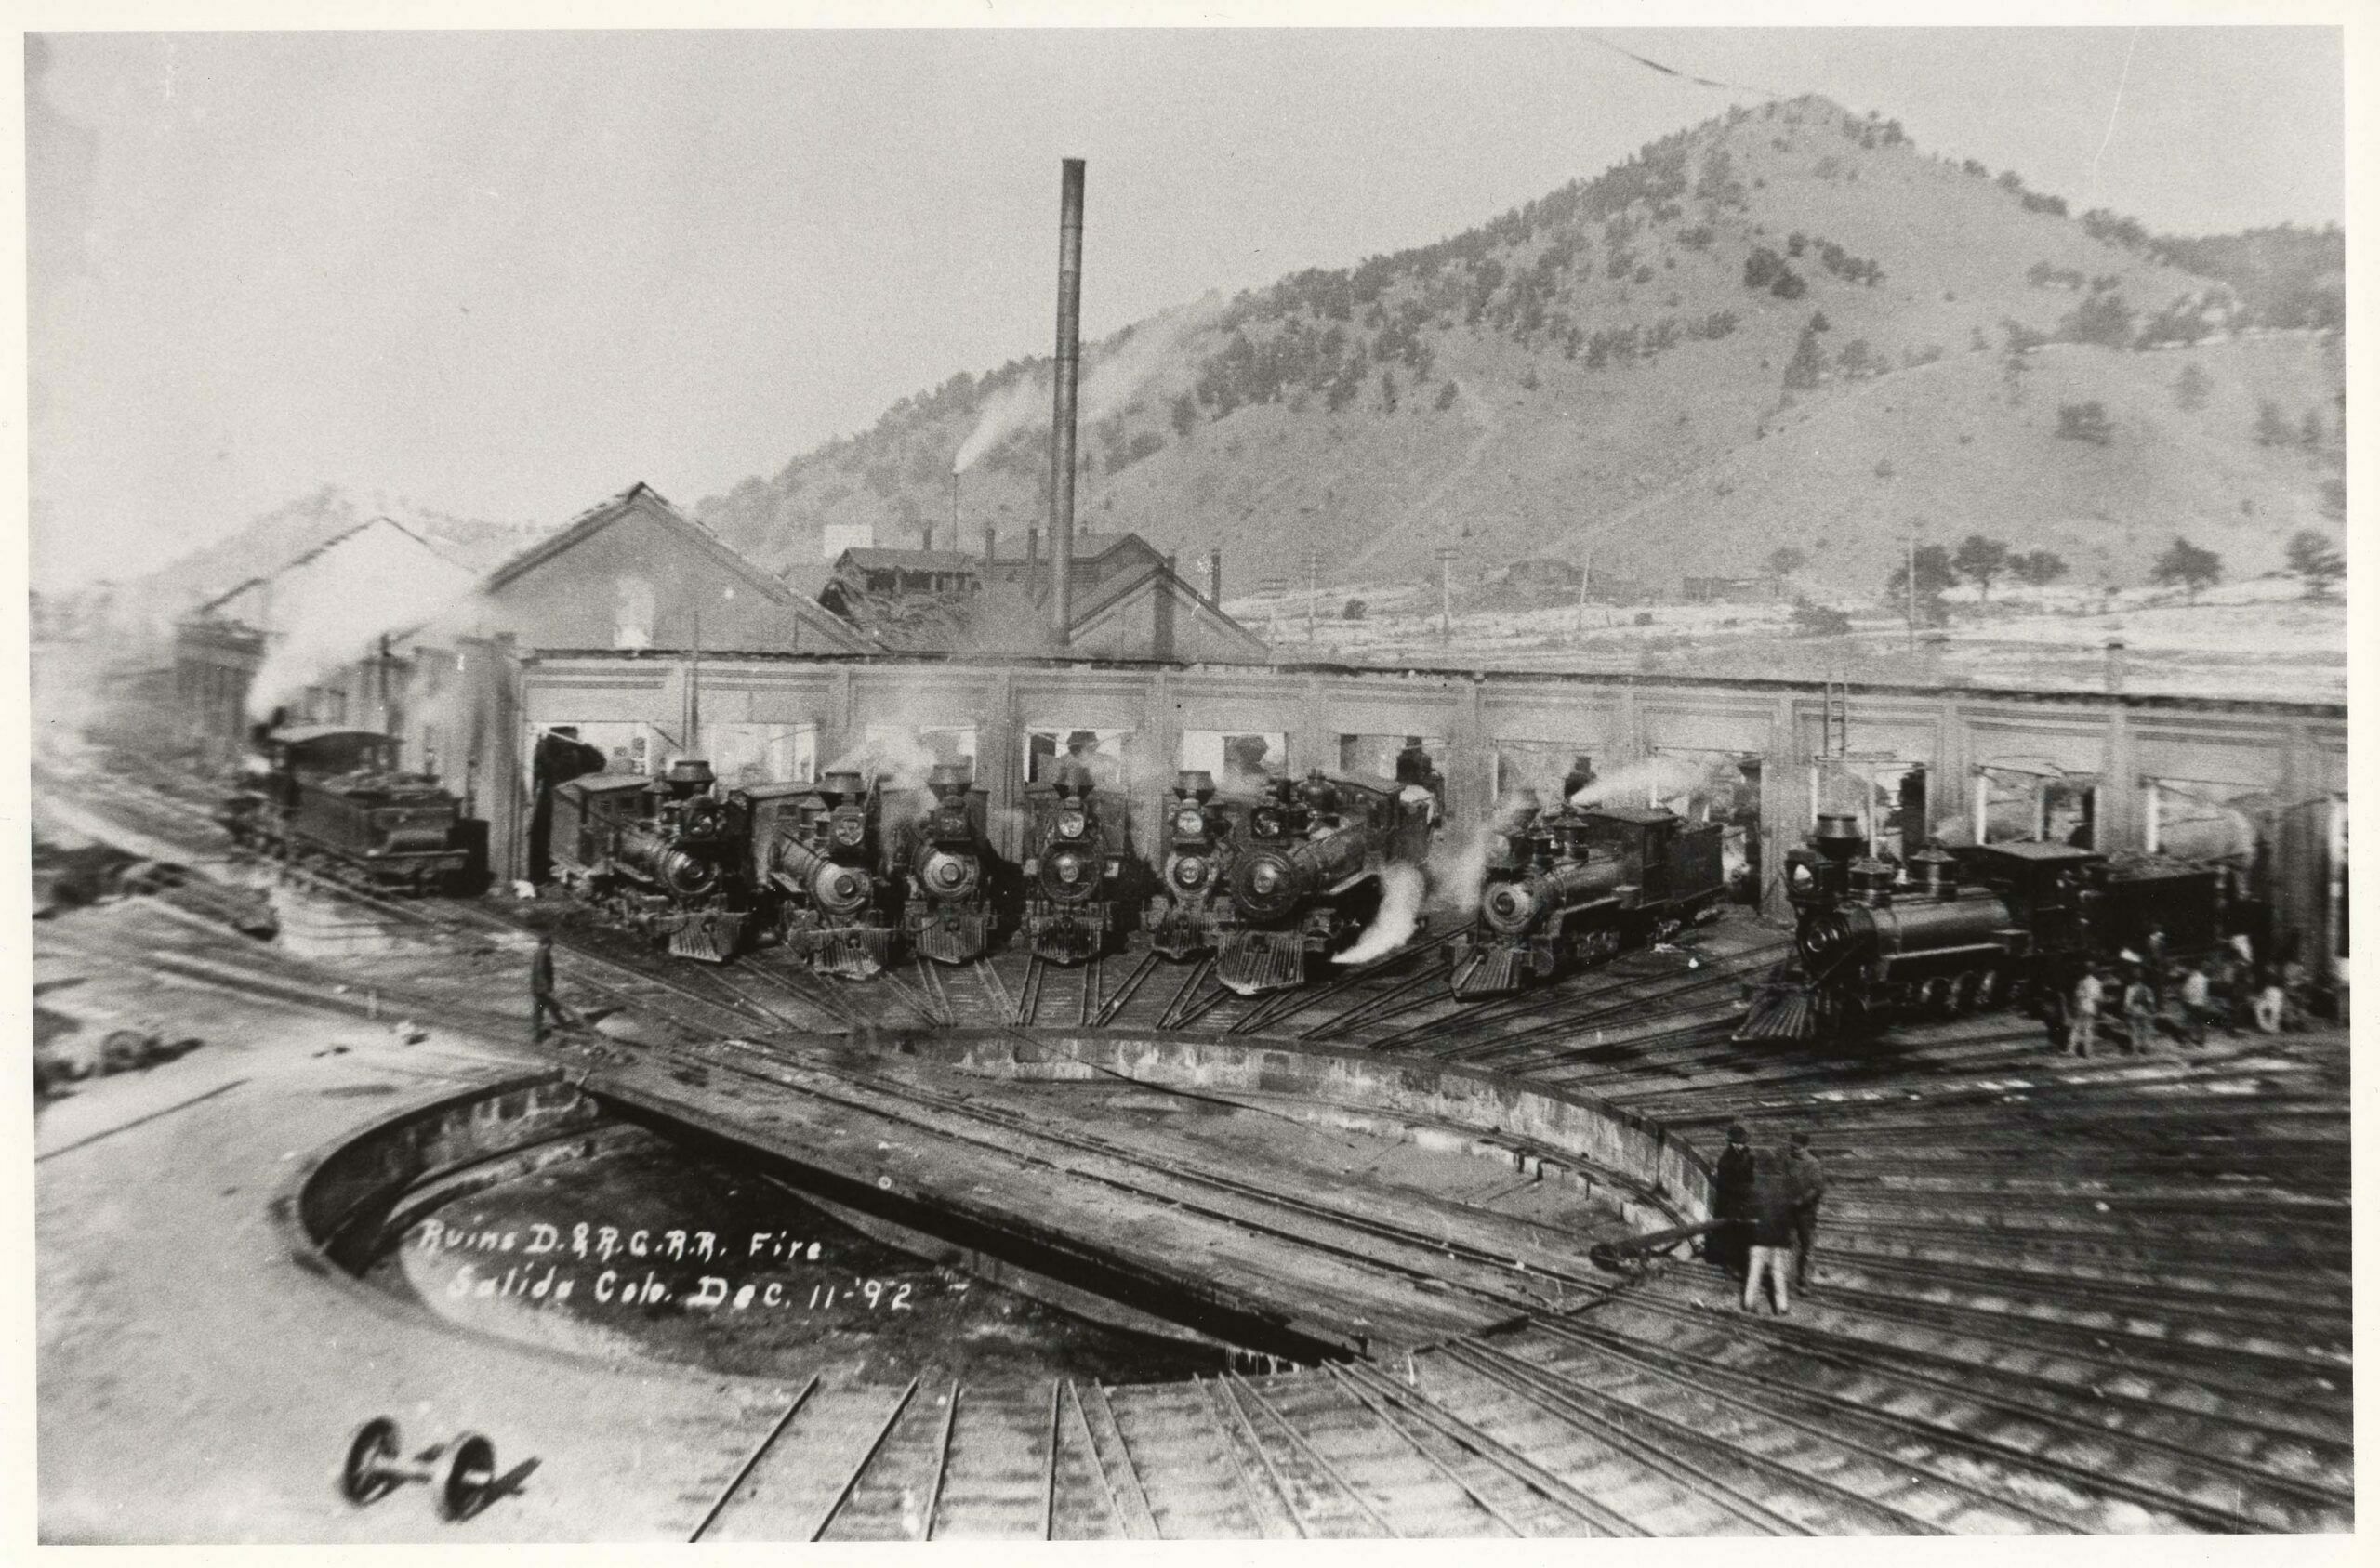 Shortly after the disastrous 1892 fire, locomotive servicing and repairs had to be done out in the open, in front of the roundhouse ruins. From this angle, the machine shop was at the left, and the charred boiler-house roof was visible beside the stack. Prior to the fire, the arch in the roundhouse doors had been bricked up. The 62-foot turntable was still in use. A standard-gauge switch engine, an 1890 Class 113 (C-28) Baldwin 2-8-0 in the 600-series, stood over the ashpit. Spotted on the roundhouse leads, from left to right, were Engines 227, 283, 400 (?), 401, 44, 530 (standard-gauge), 407 and 403. Burned hulks of locomotives remained in the remnants of the roundhouse.  (2)